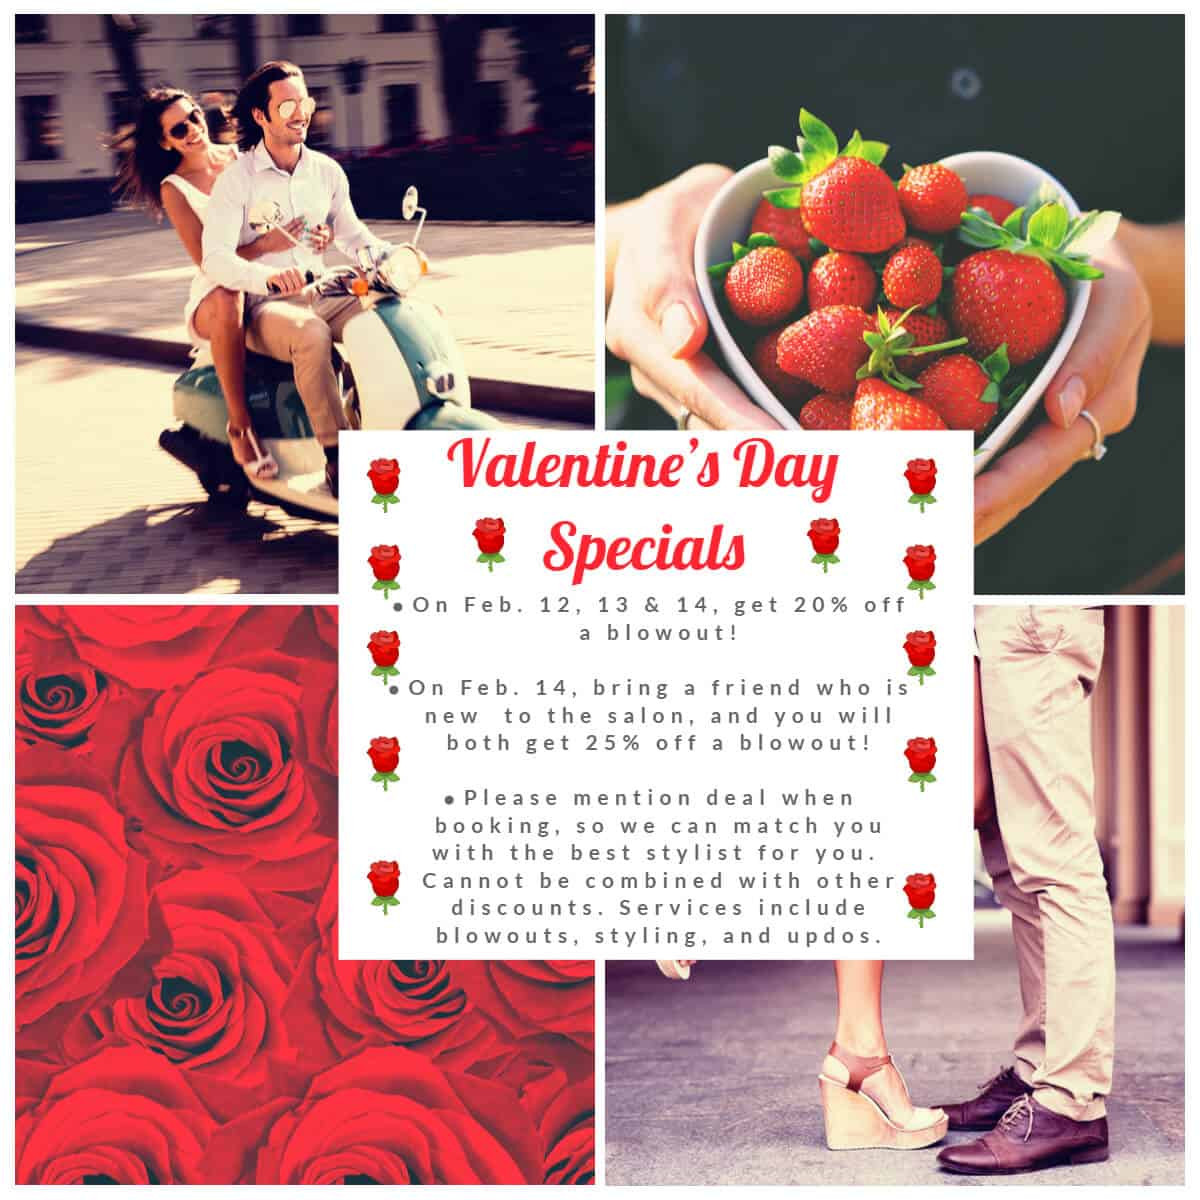 Ideas For Valentines Day 2019
 Valentines Day 2019 Specials and Gift Ideas Amaci Salon